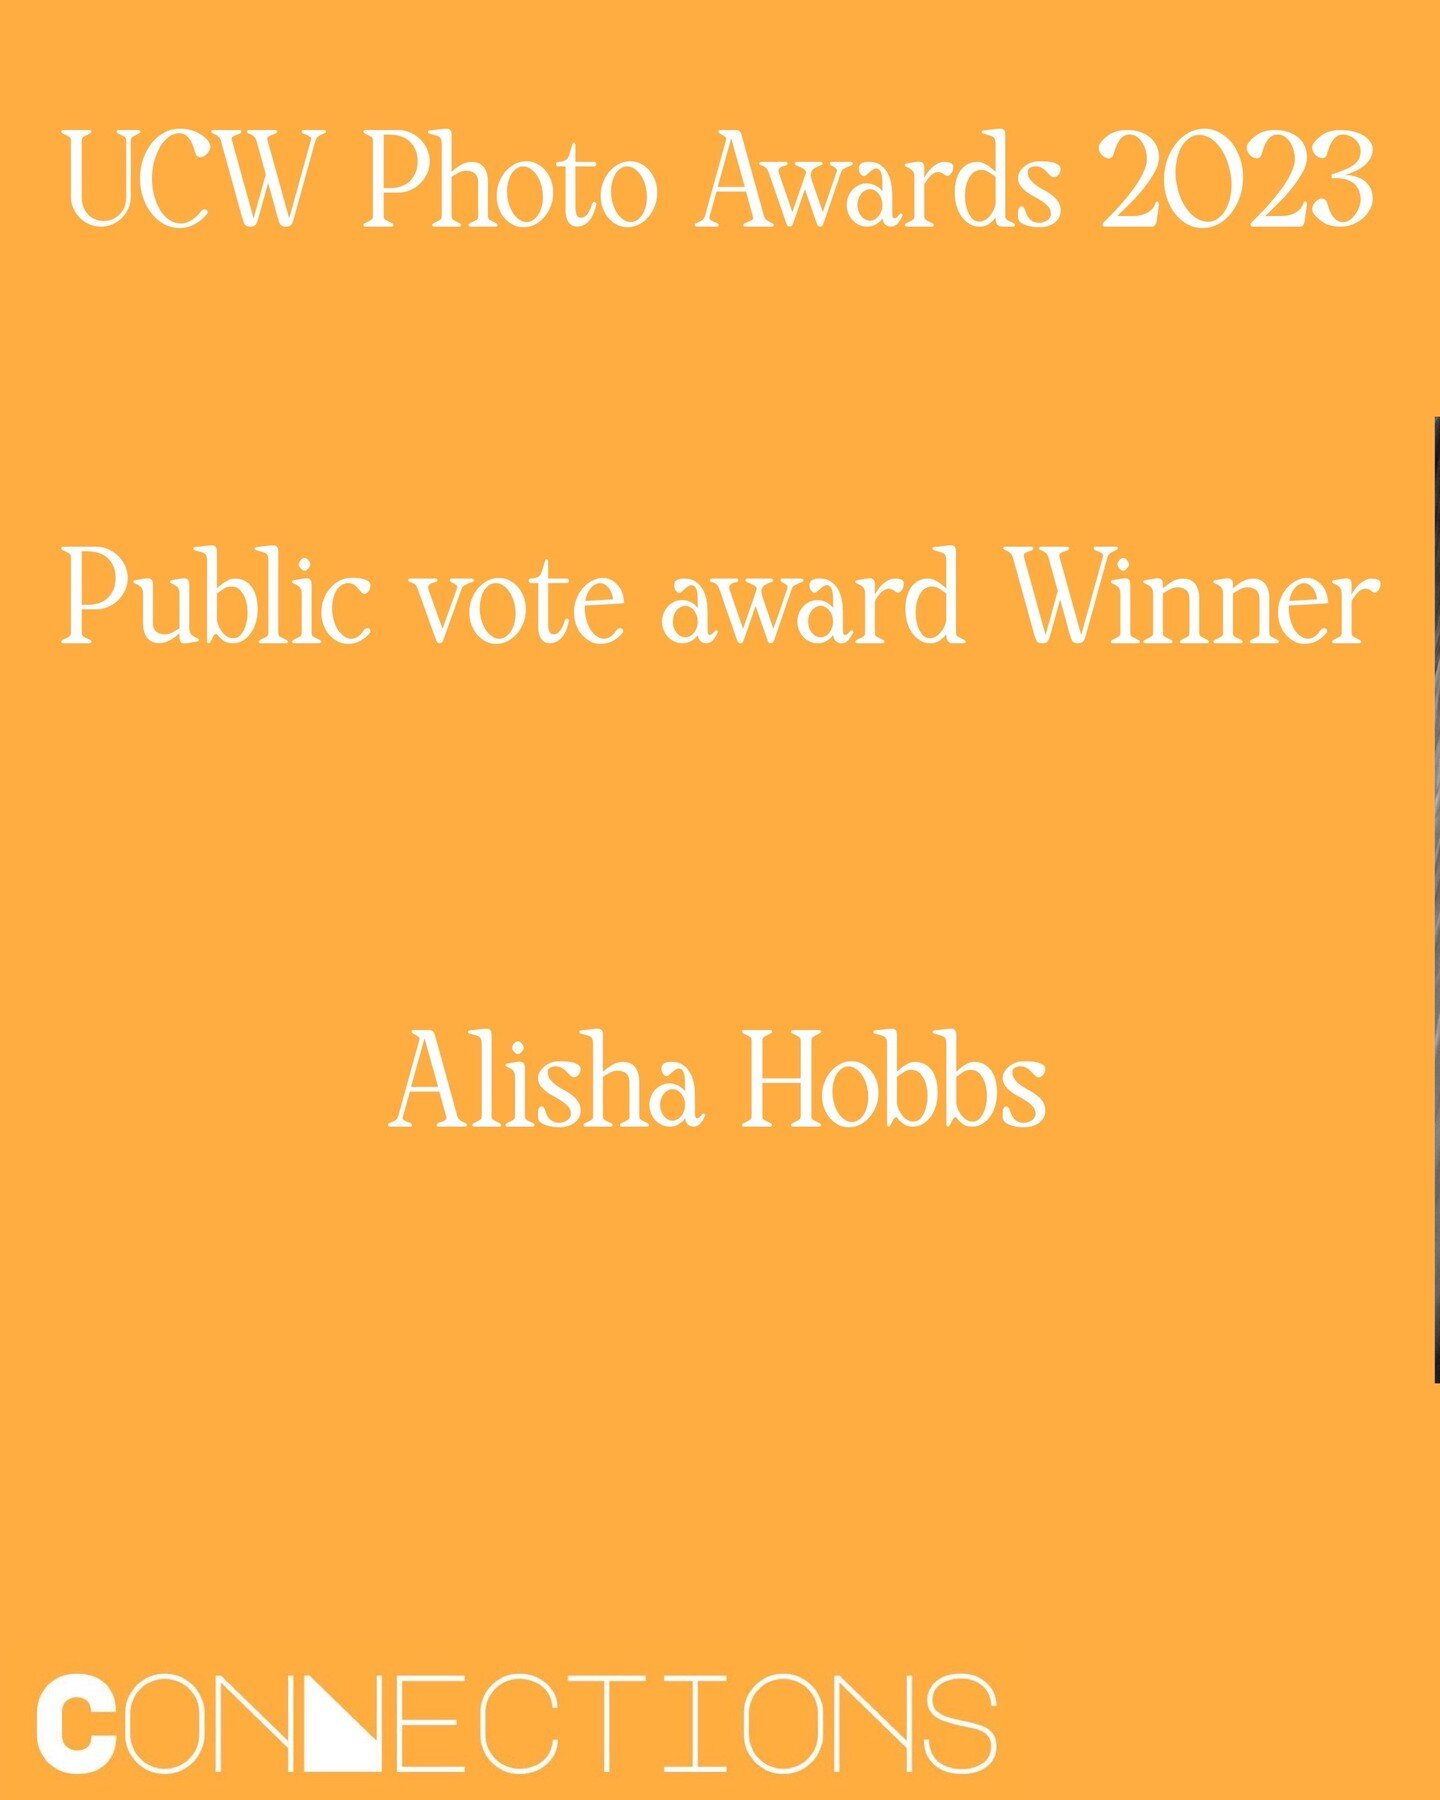 It's the moment you have all been waiting for the public vote award winner announcement.
.
.
.
Please join us and give a huge congratulations to finalist Alisha Hobbs (@alishajadephoto) who has won the public vote award during the opening weekend of 